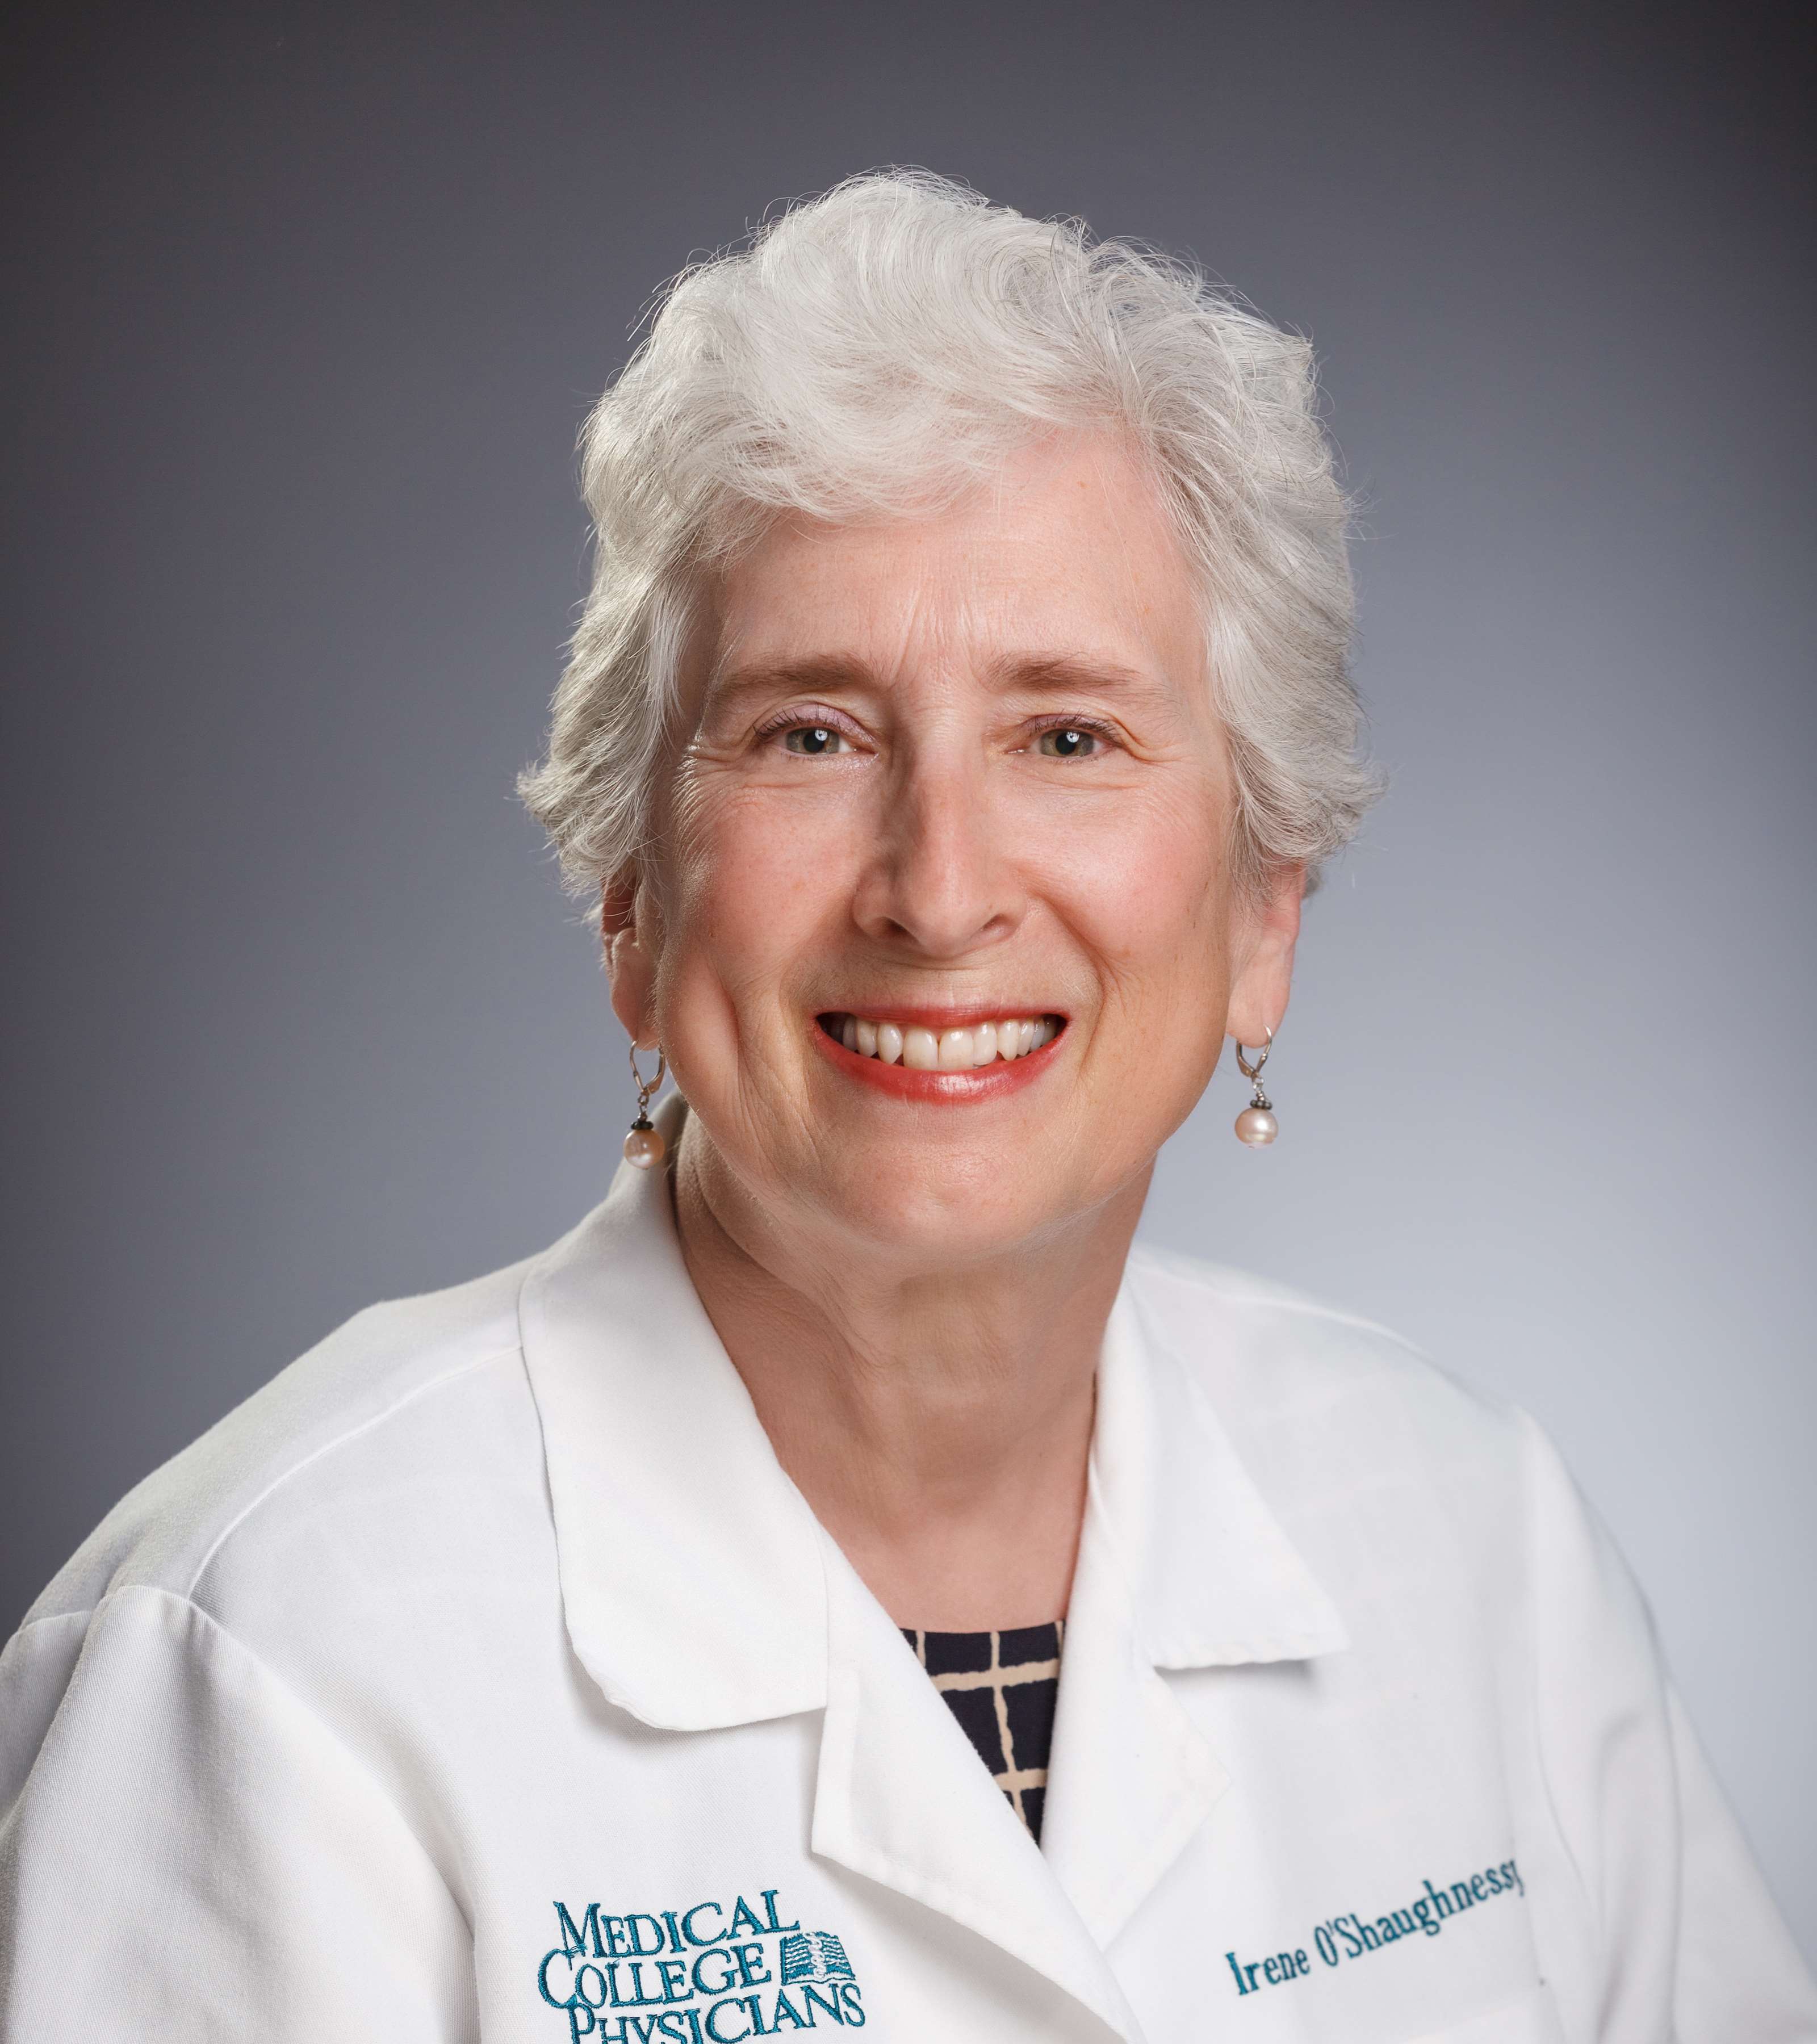 Irene O'Shaughnessy, MD, FACP